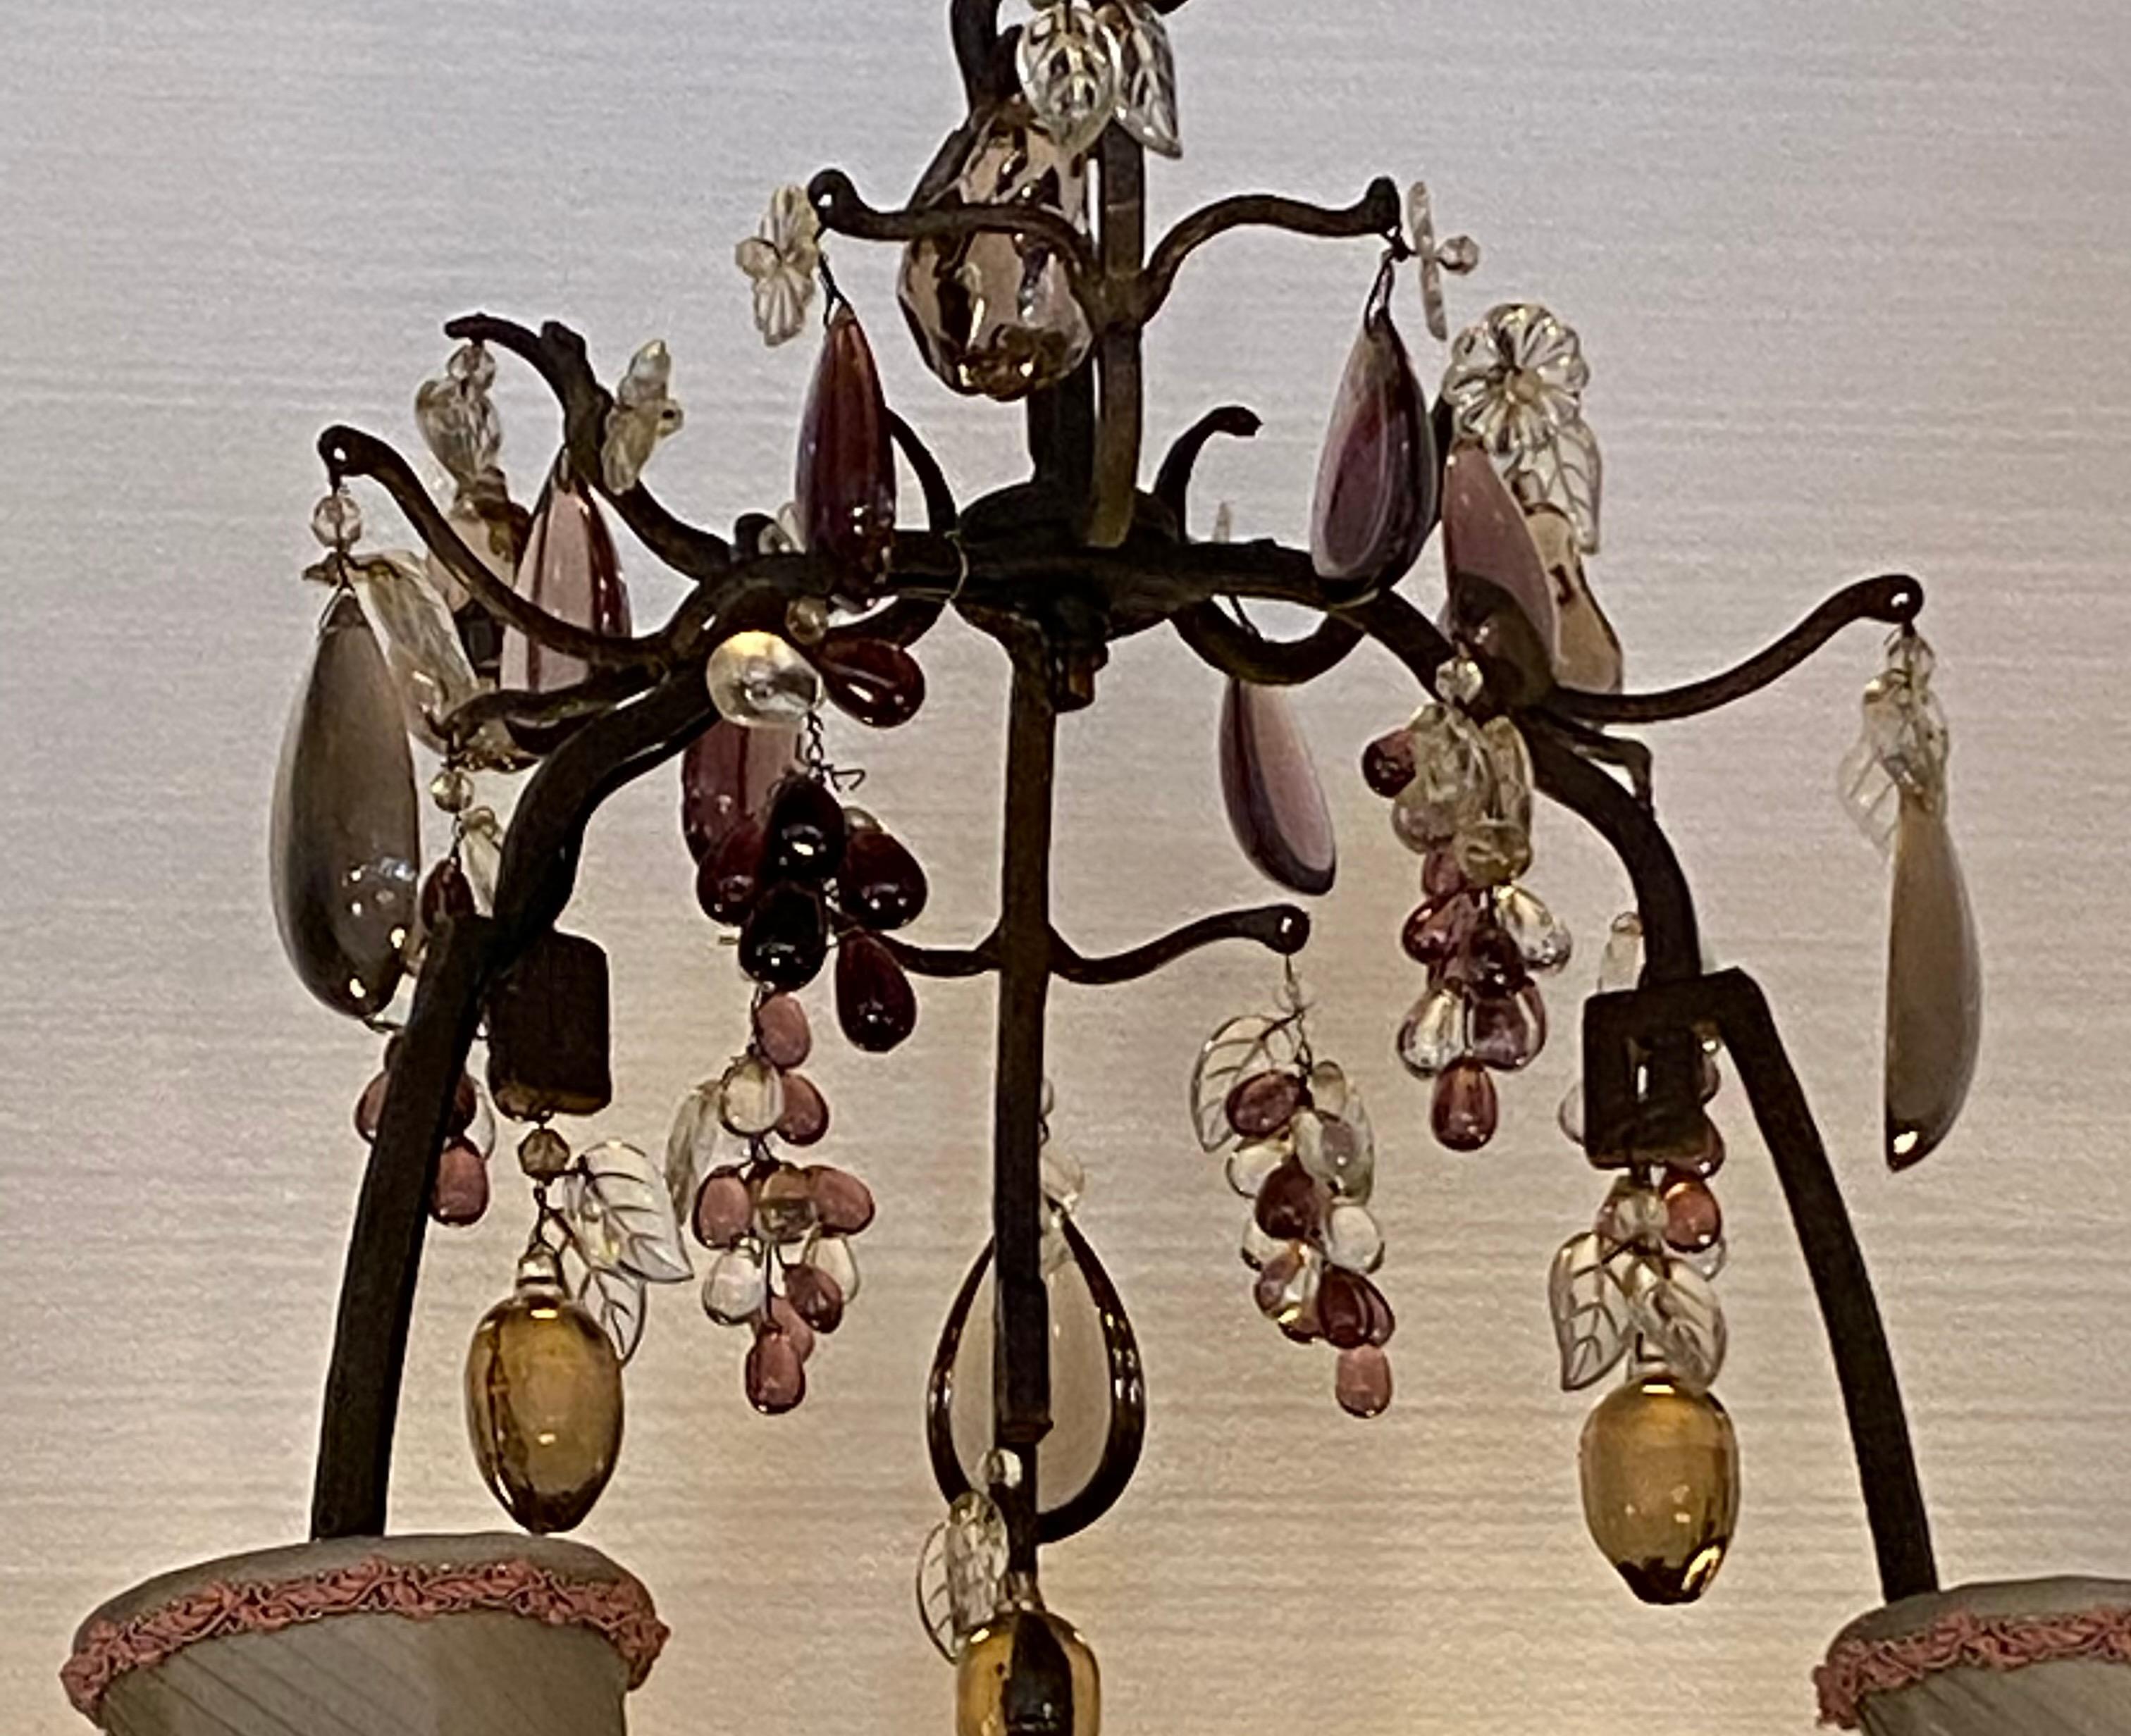 Iron and gilt tole with six lights; having grape, apple, pears, and clear drops. Main colors are clear and light brown. Chandelier comes with 6 - 4